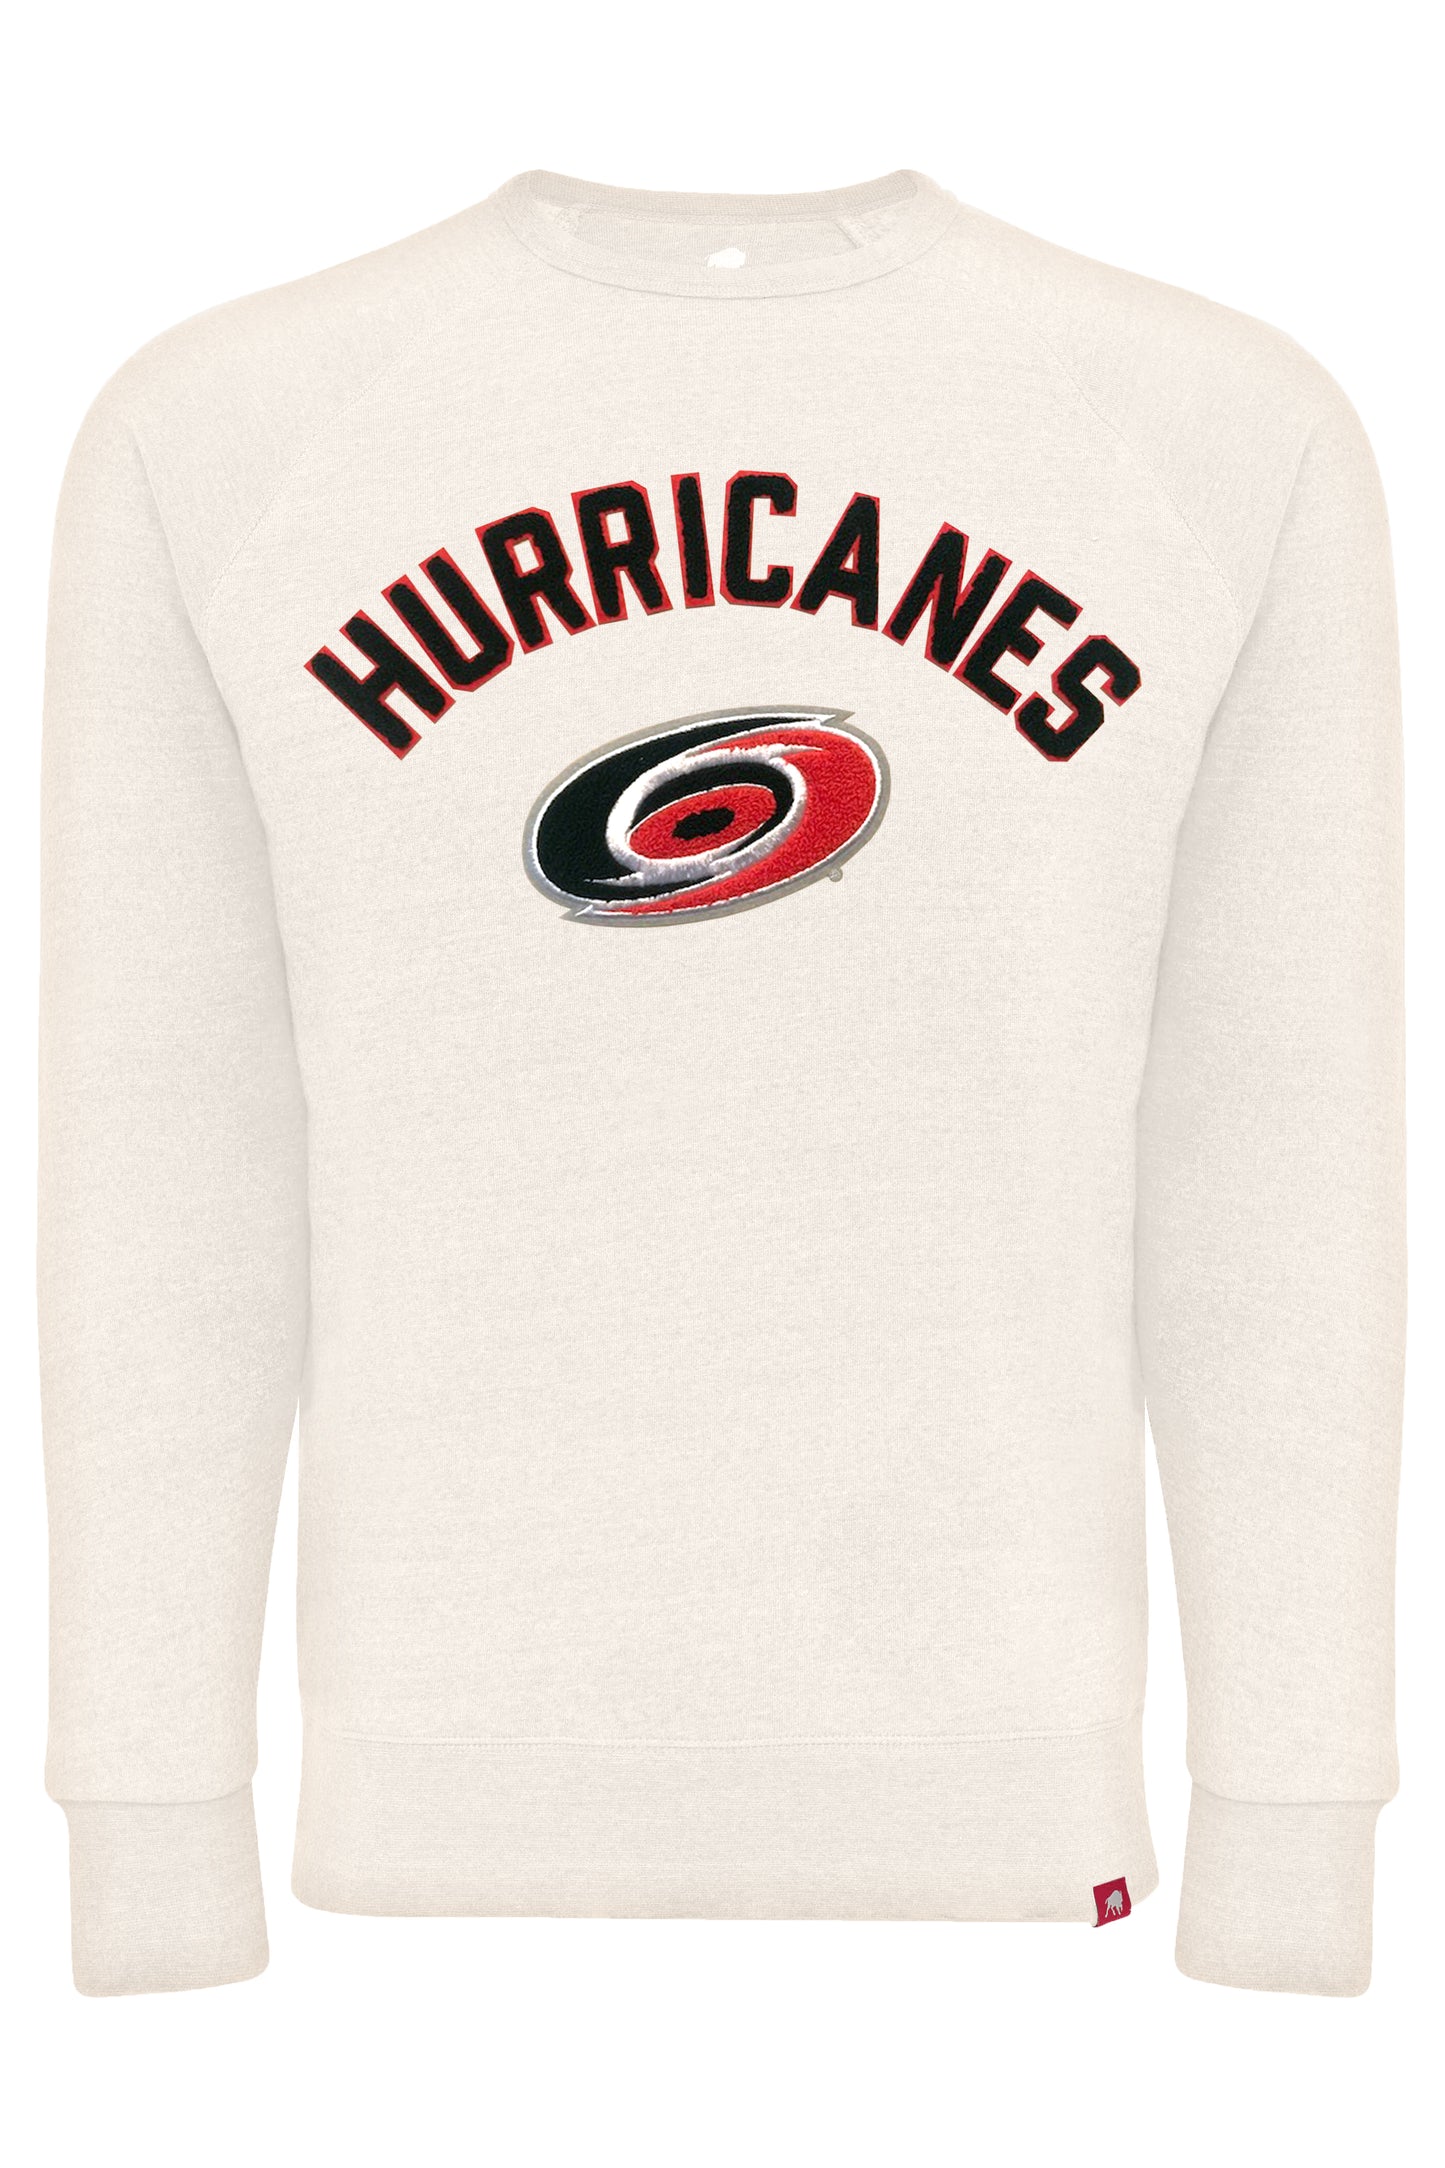 Bone colored crew neck with Hurricanes arched text and primary logo beneath